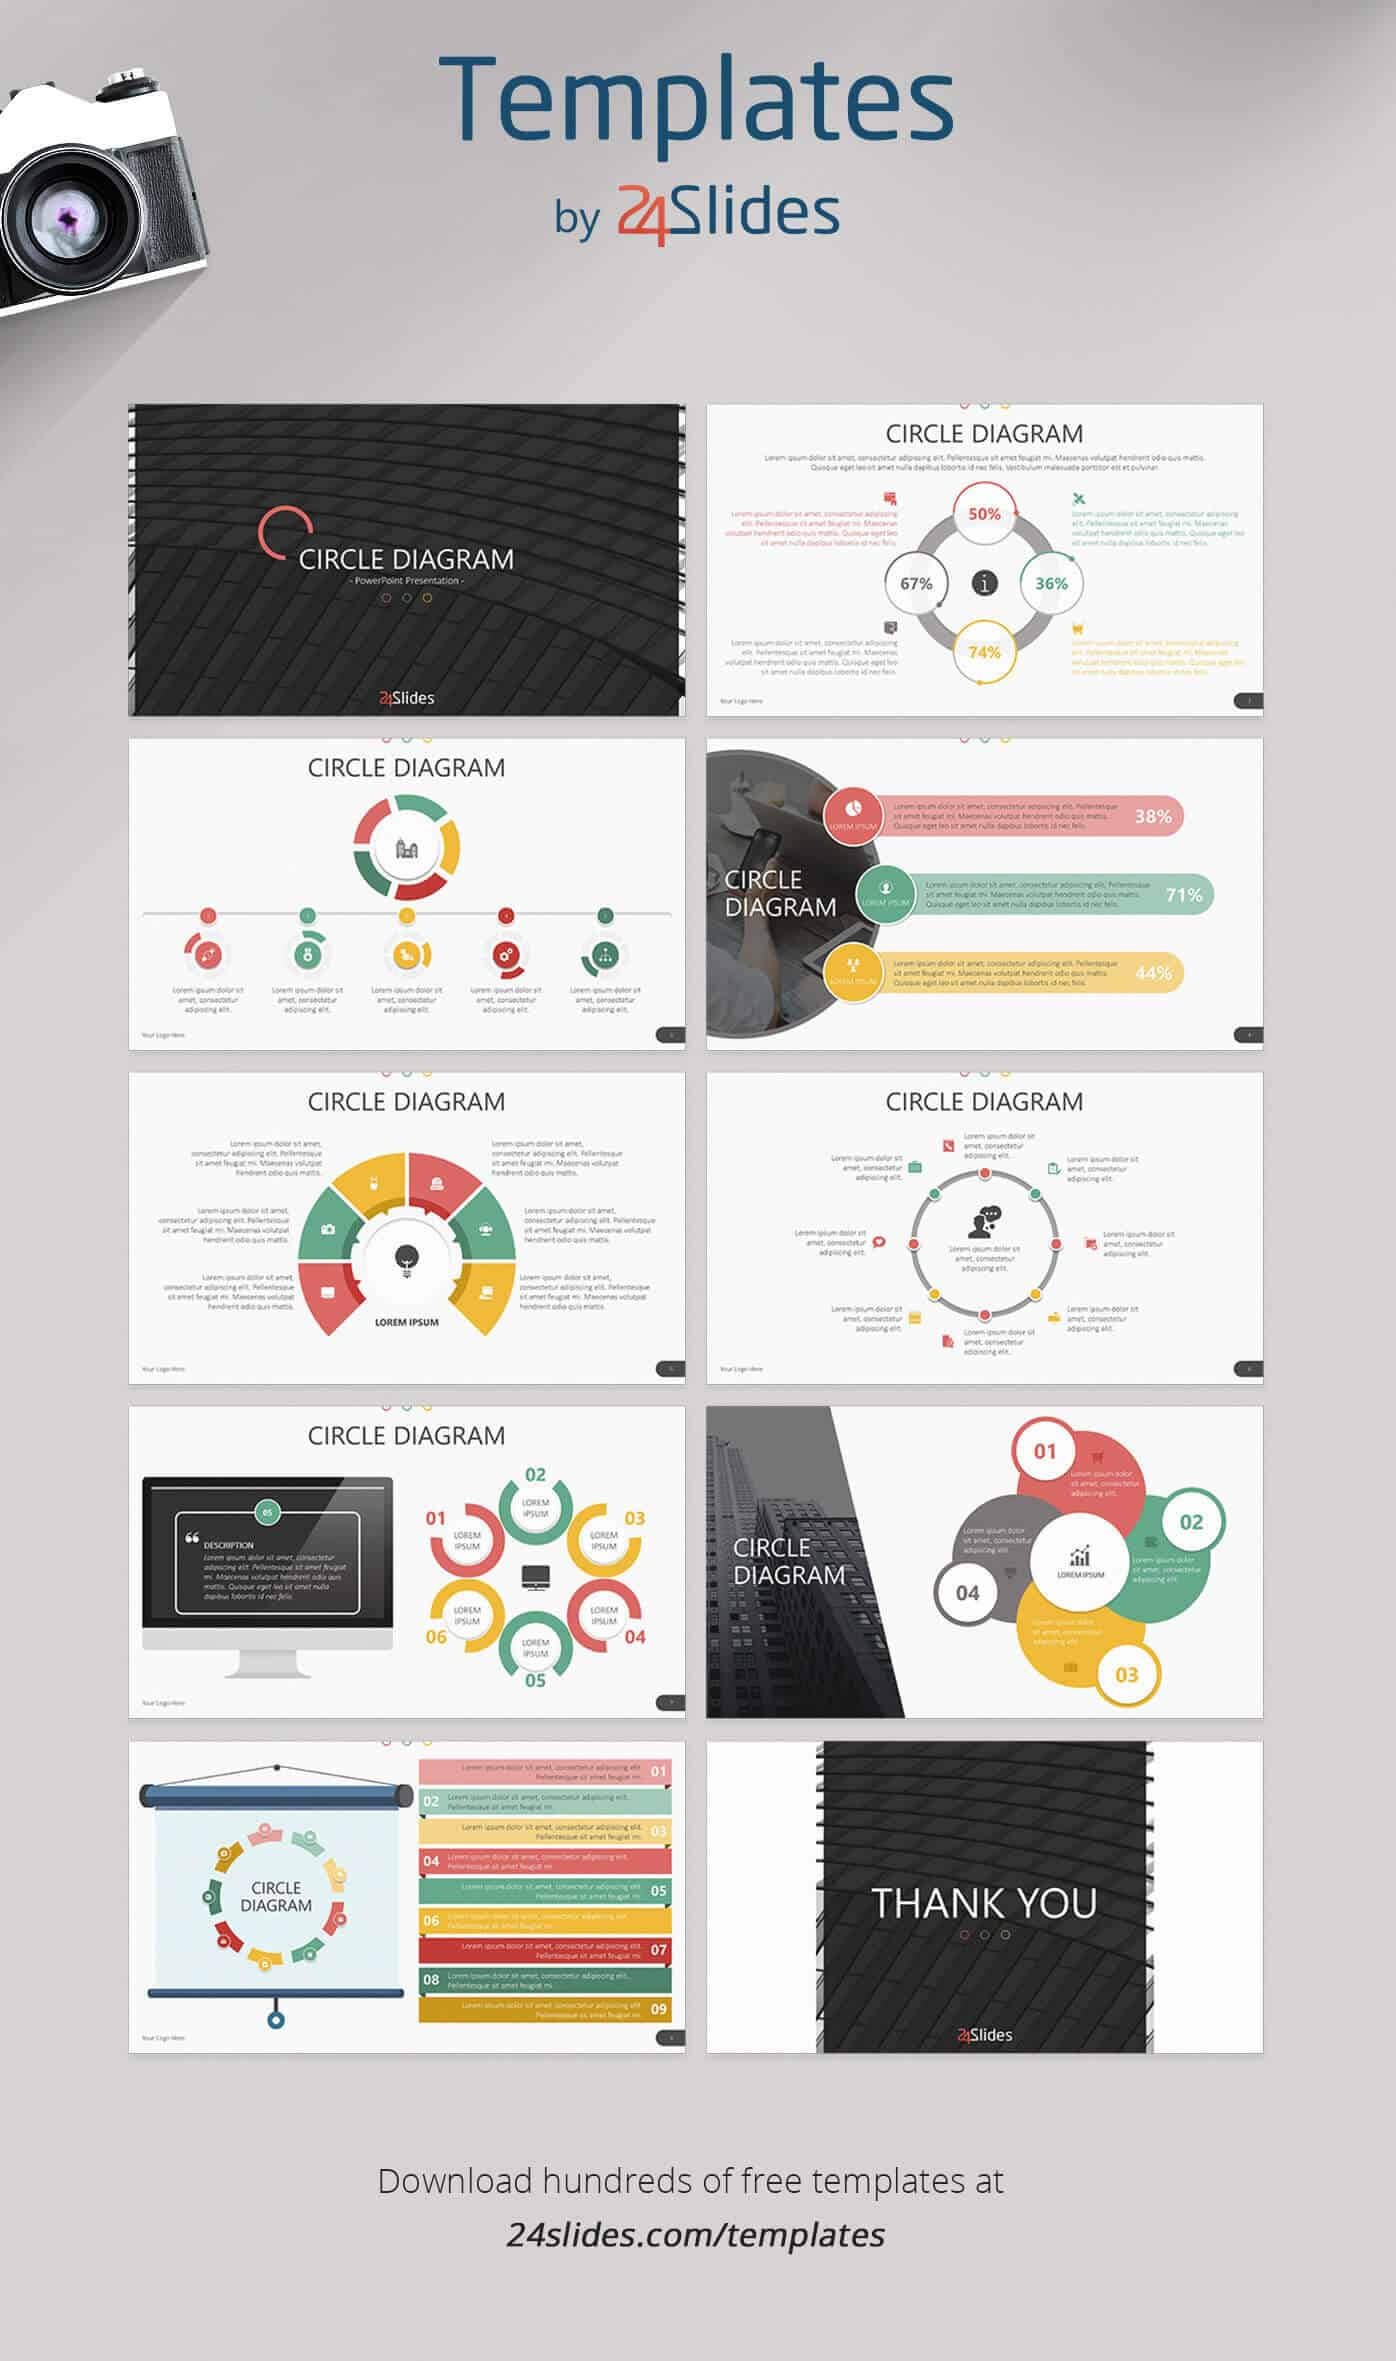 15 Fun And Colorful Free Powerpoint Templates | Present Better Within Powerpoint Slides Design Templates For Free